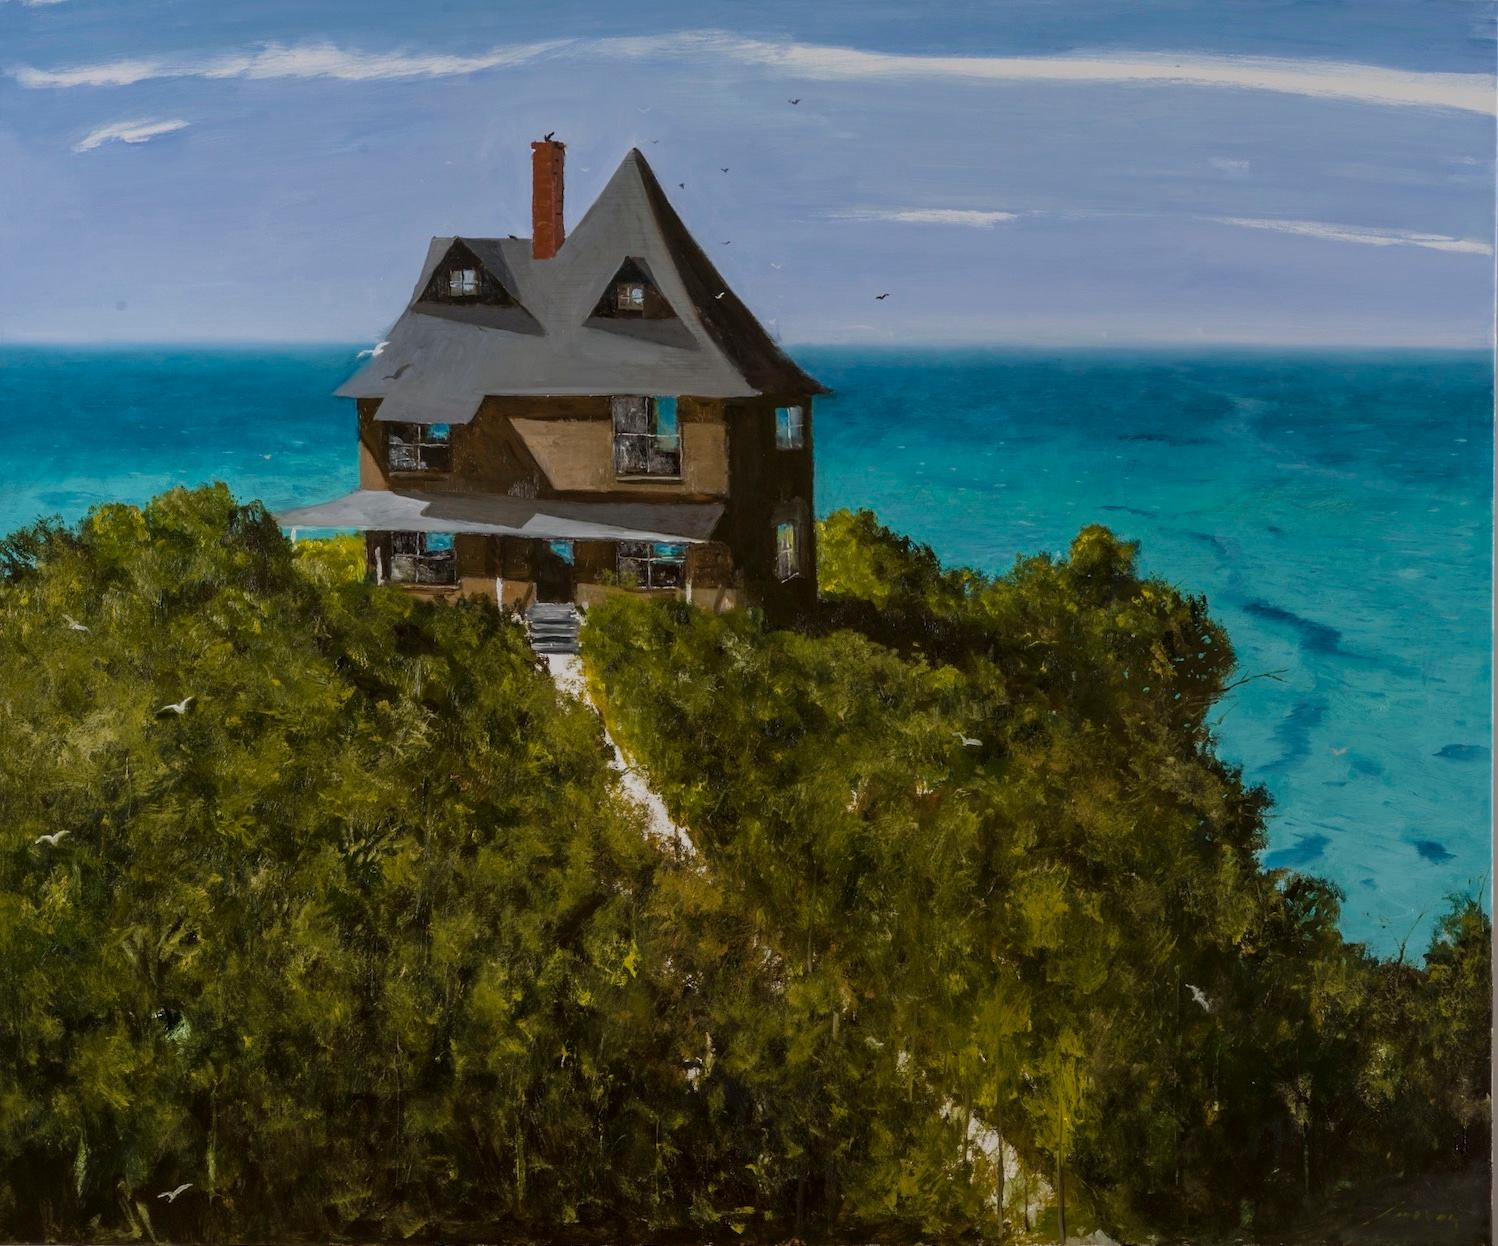 An American Poet Lives Here - Painting by Julio Larraz